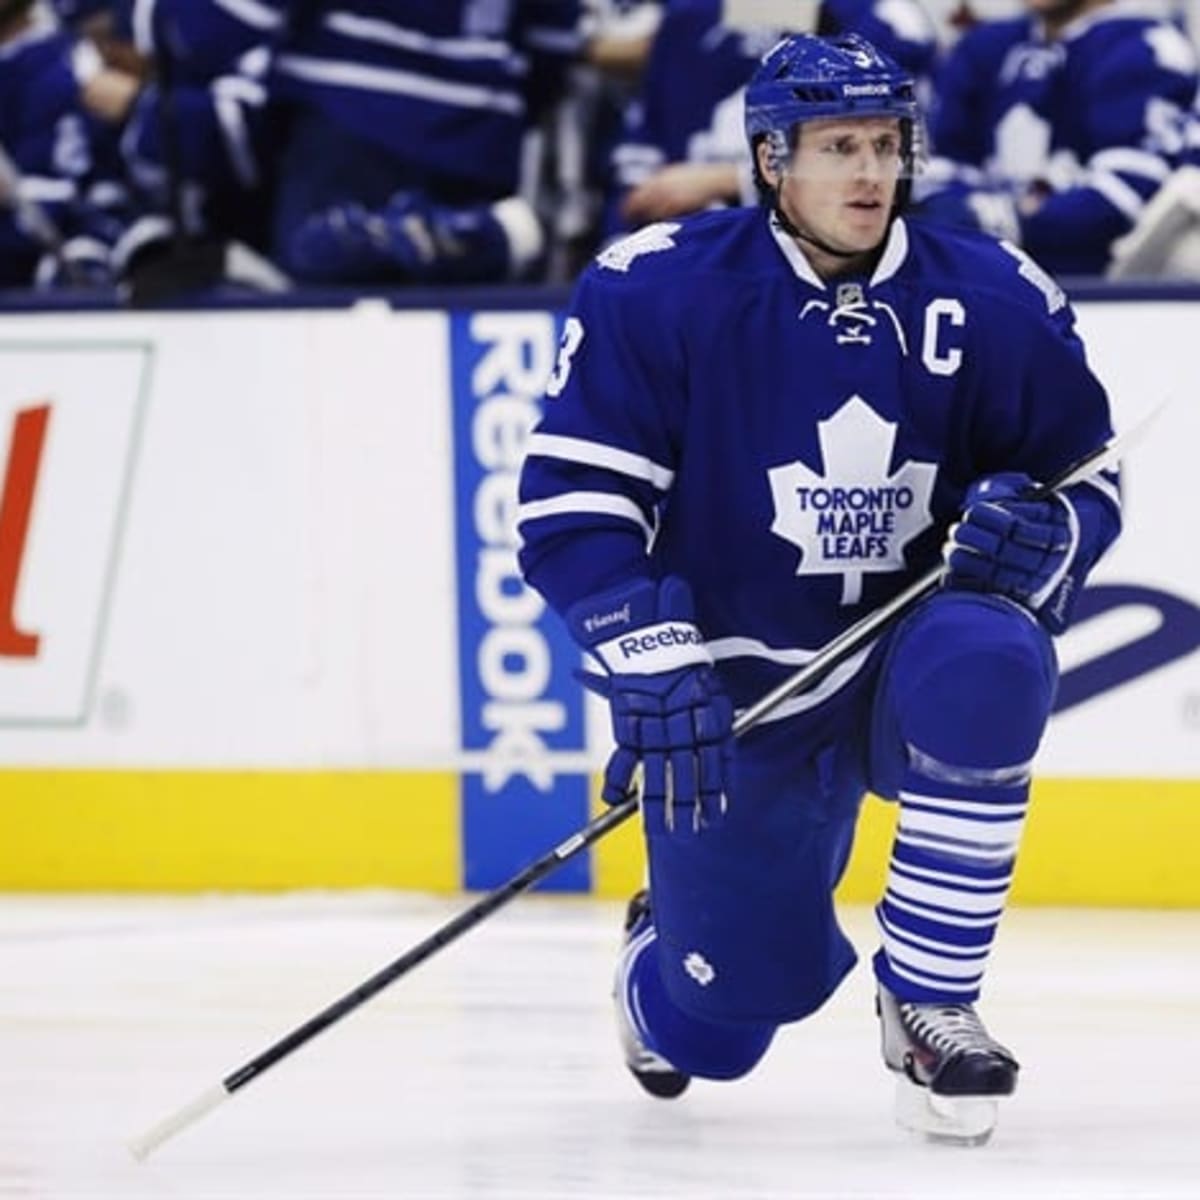 Leafs' Joffrey Lupul says signing long-term deal was easy decision